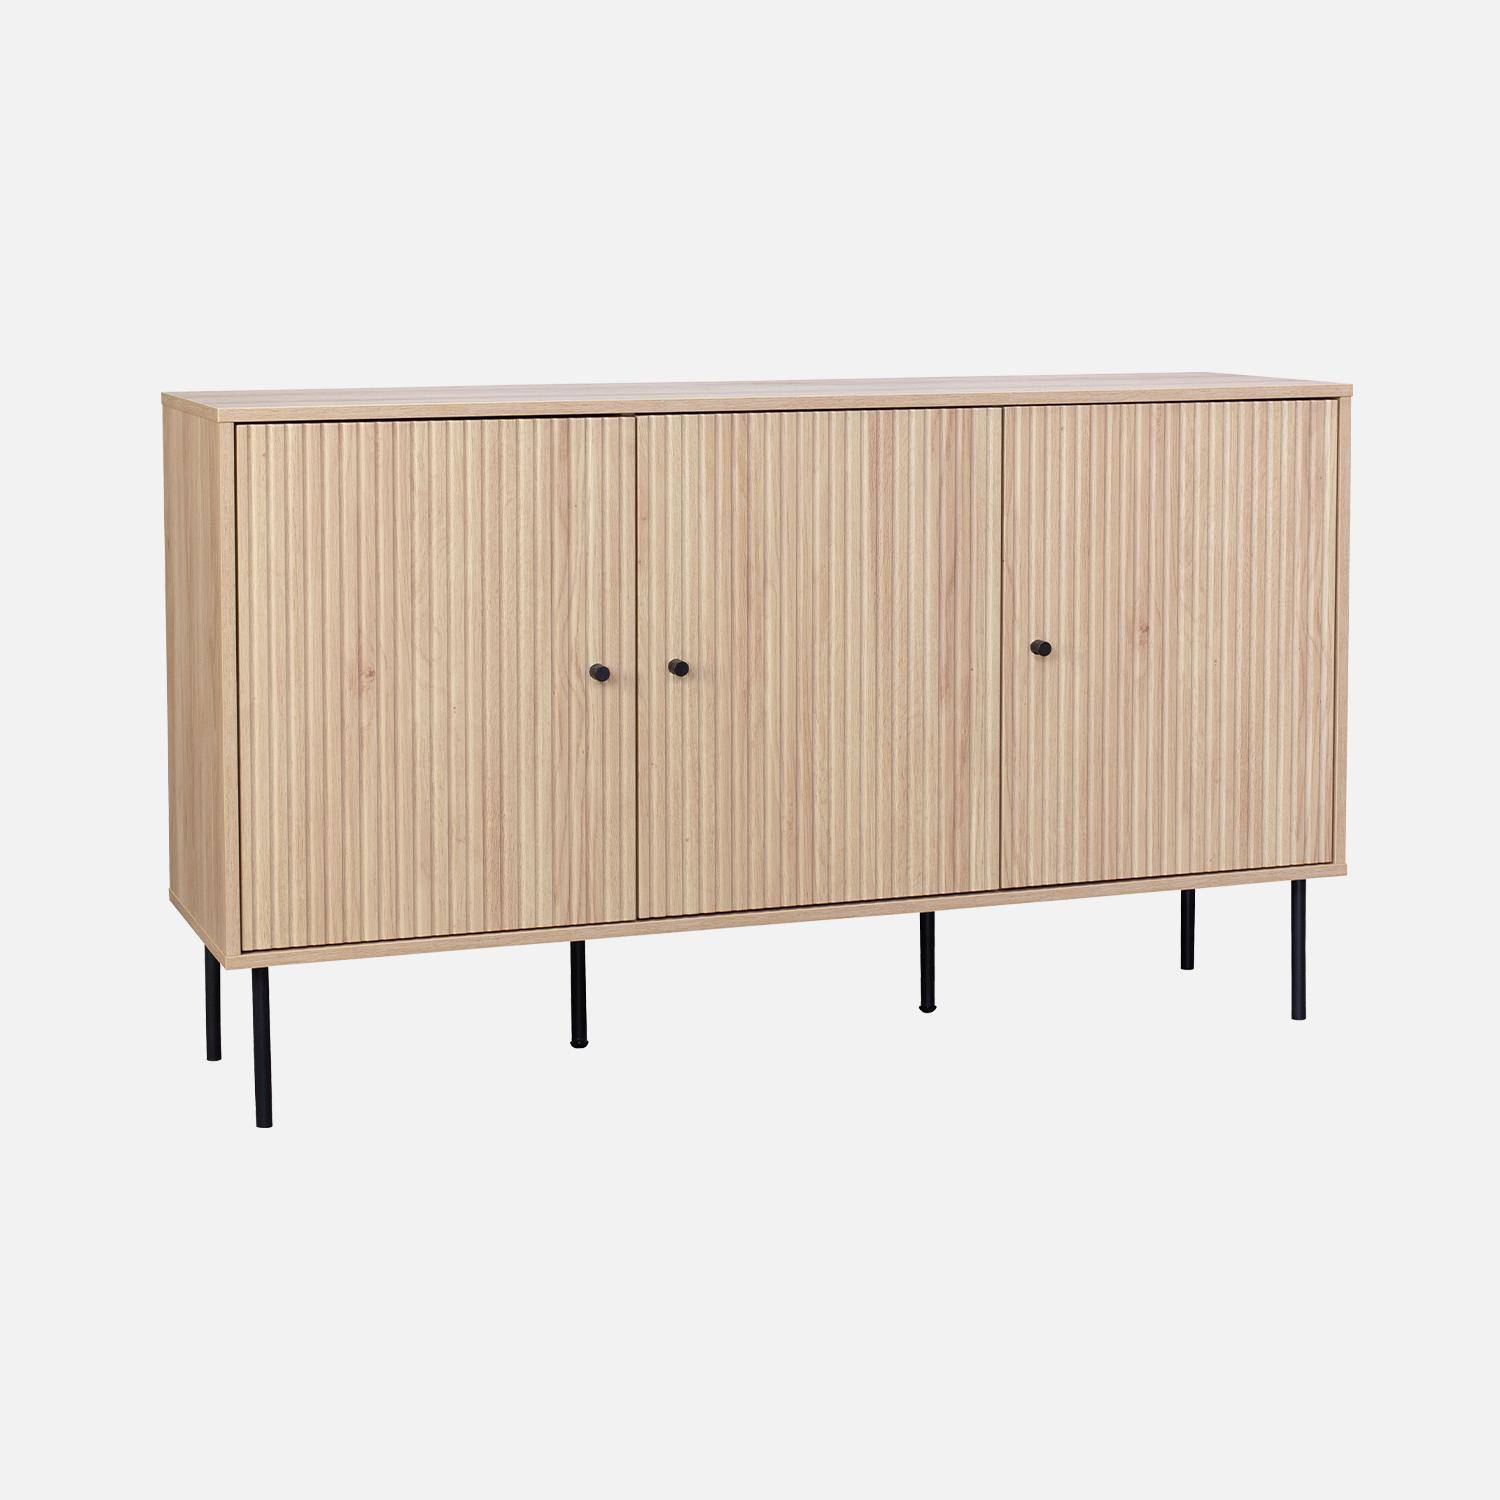 Storage sideboard in grooved wood decor with black metal handles and legs 140 cm Photo4